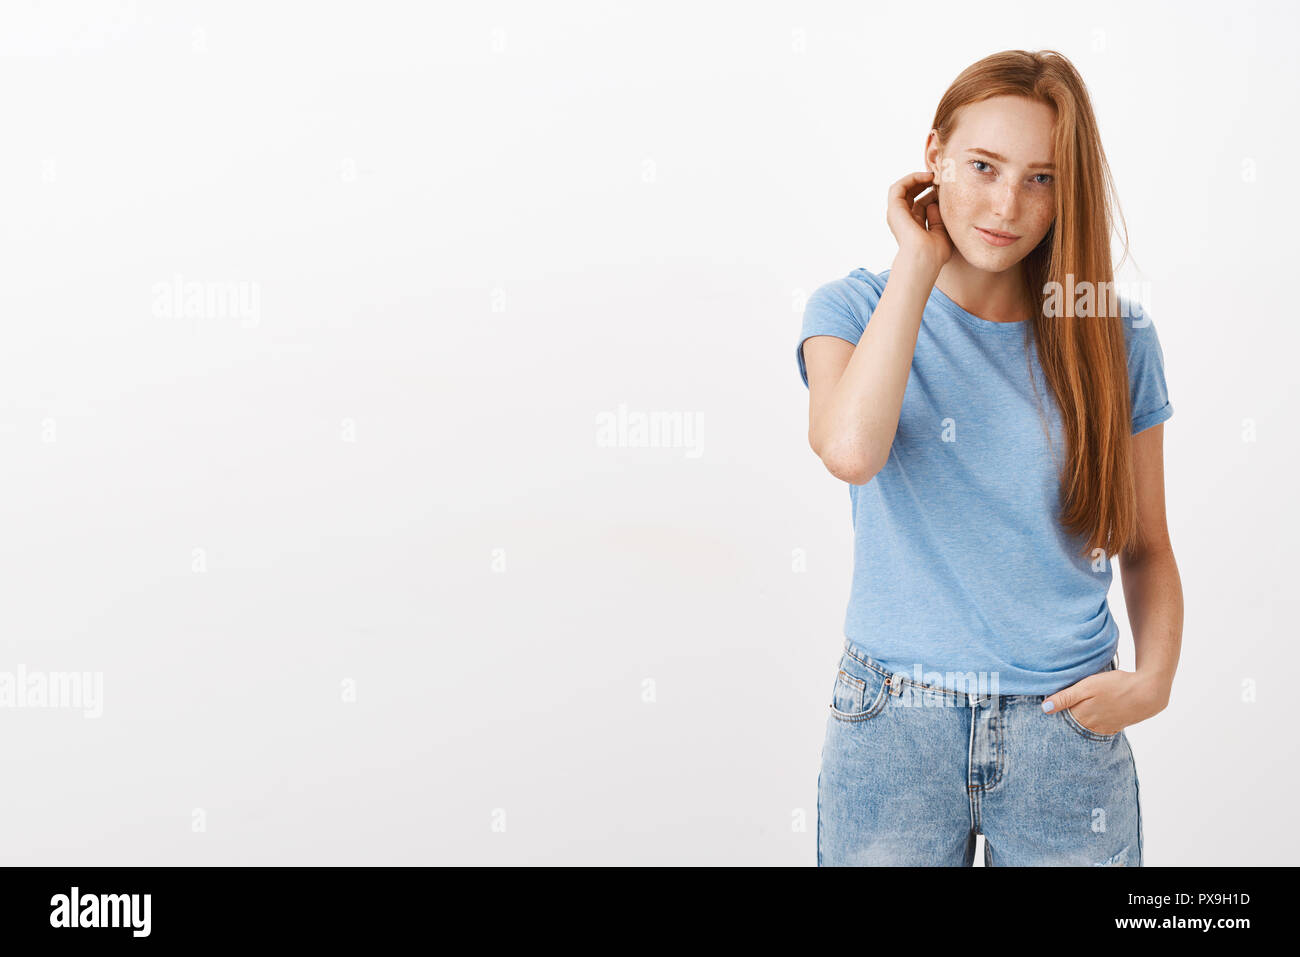 Cute young european redhead female student with freckles flicking hair behind ear holding hand in pocket and gazing with shy and awkward expression at camera asking girlfriend for date over gray wall Stock Photo